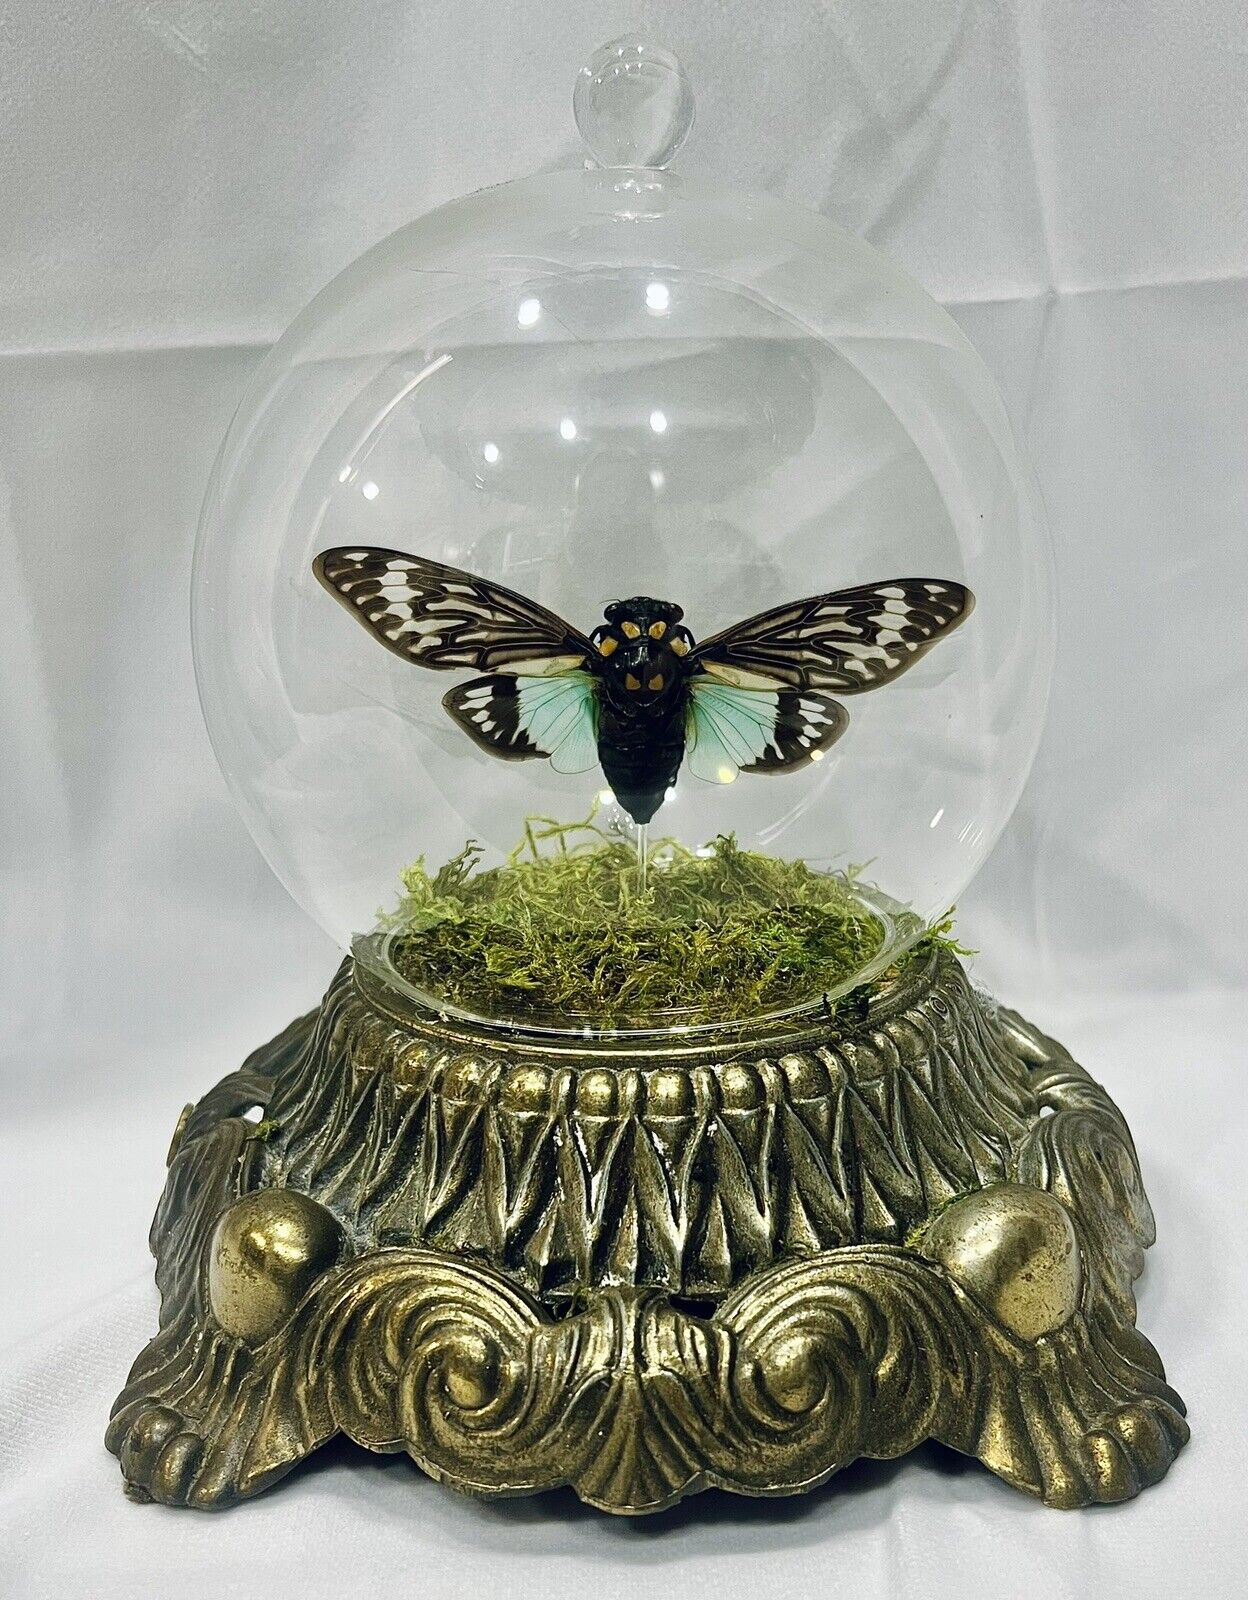 Preserved Cicada In Glass Dome With Moss On An Ornate Antique Brass Lamp Base.